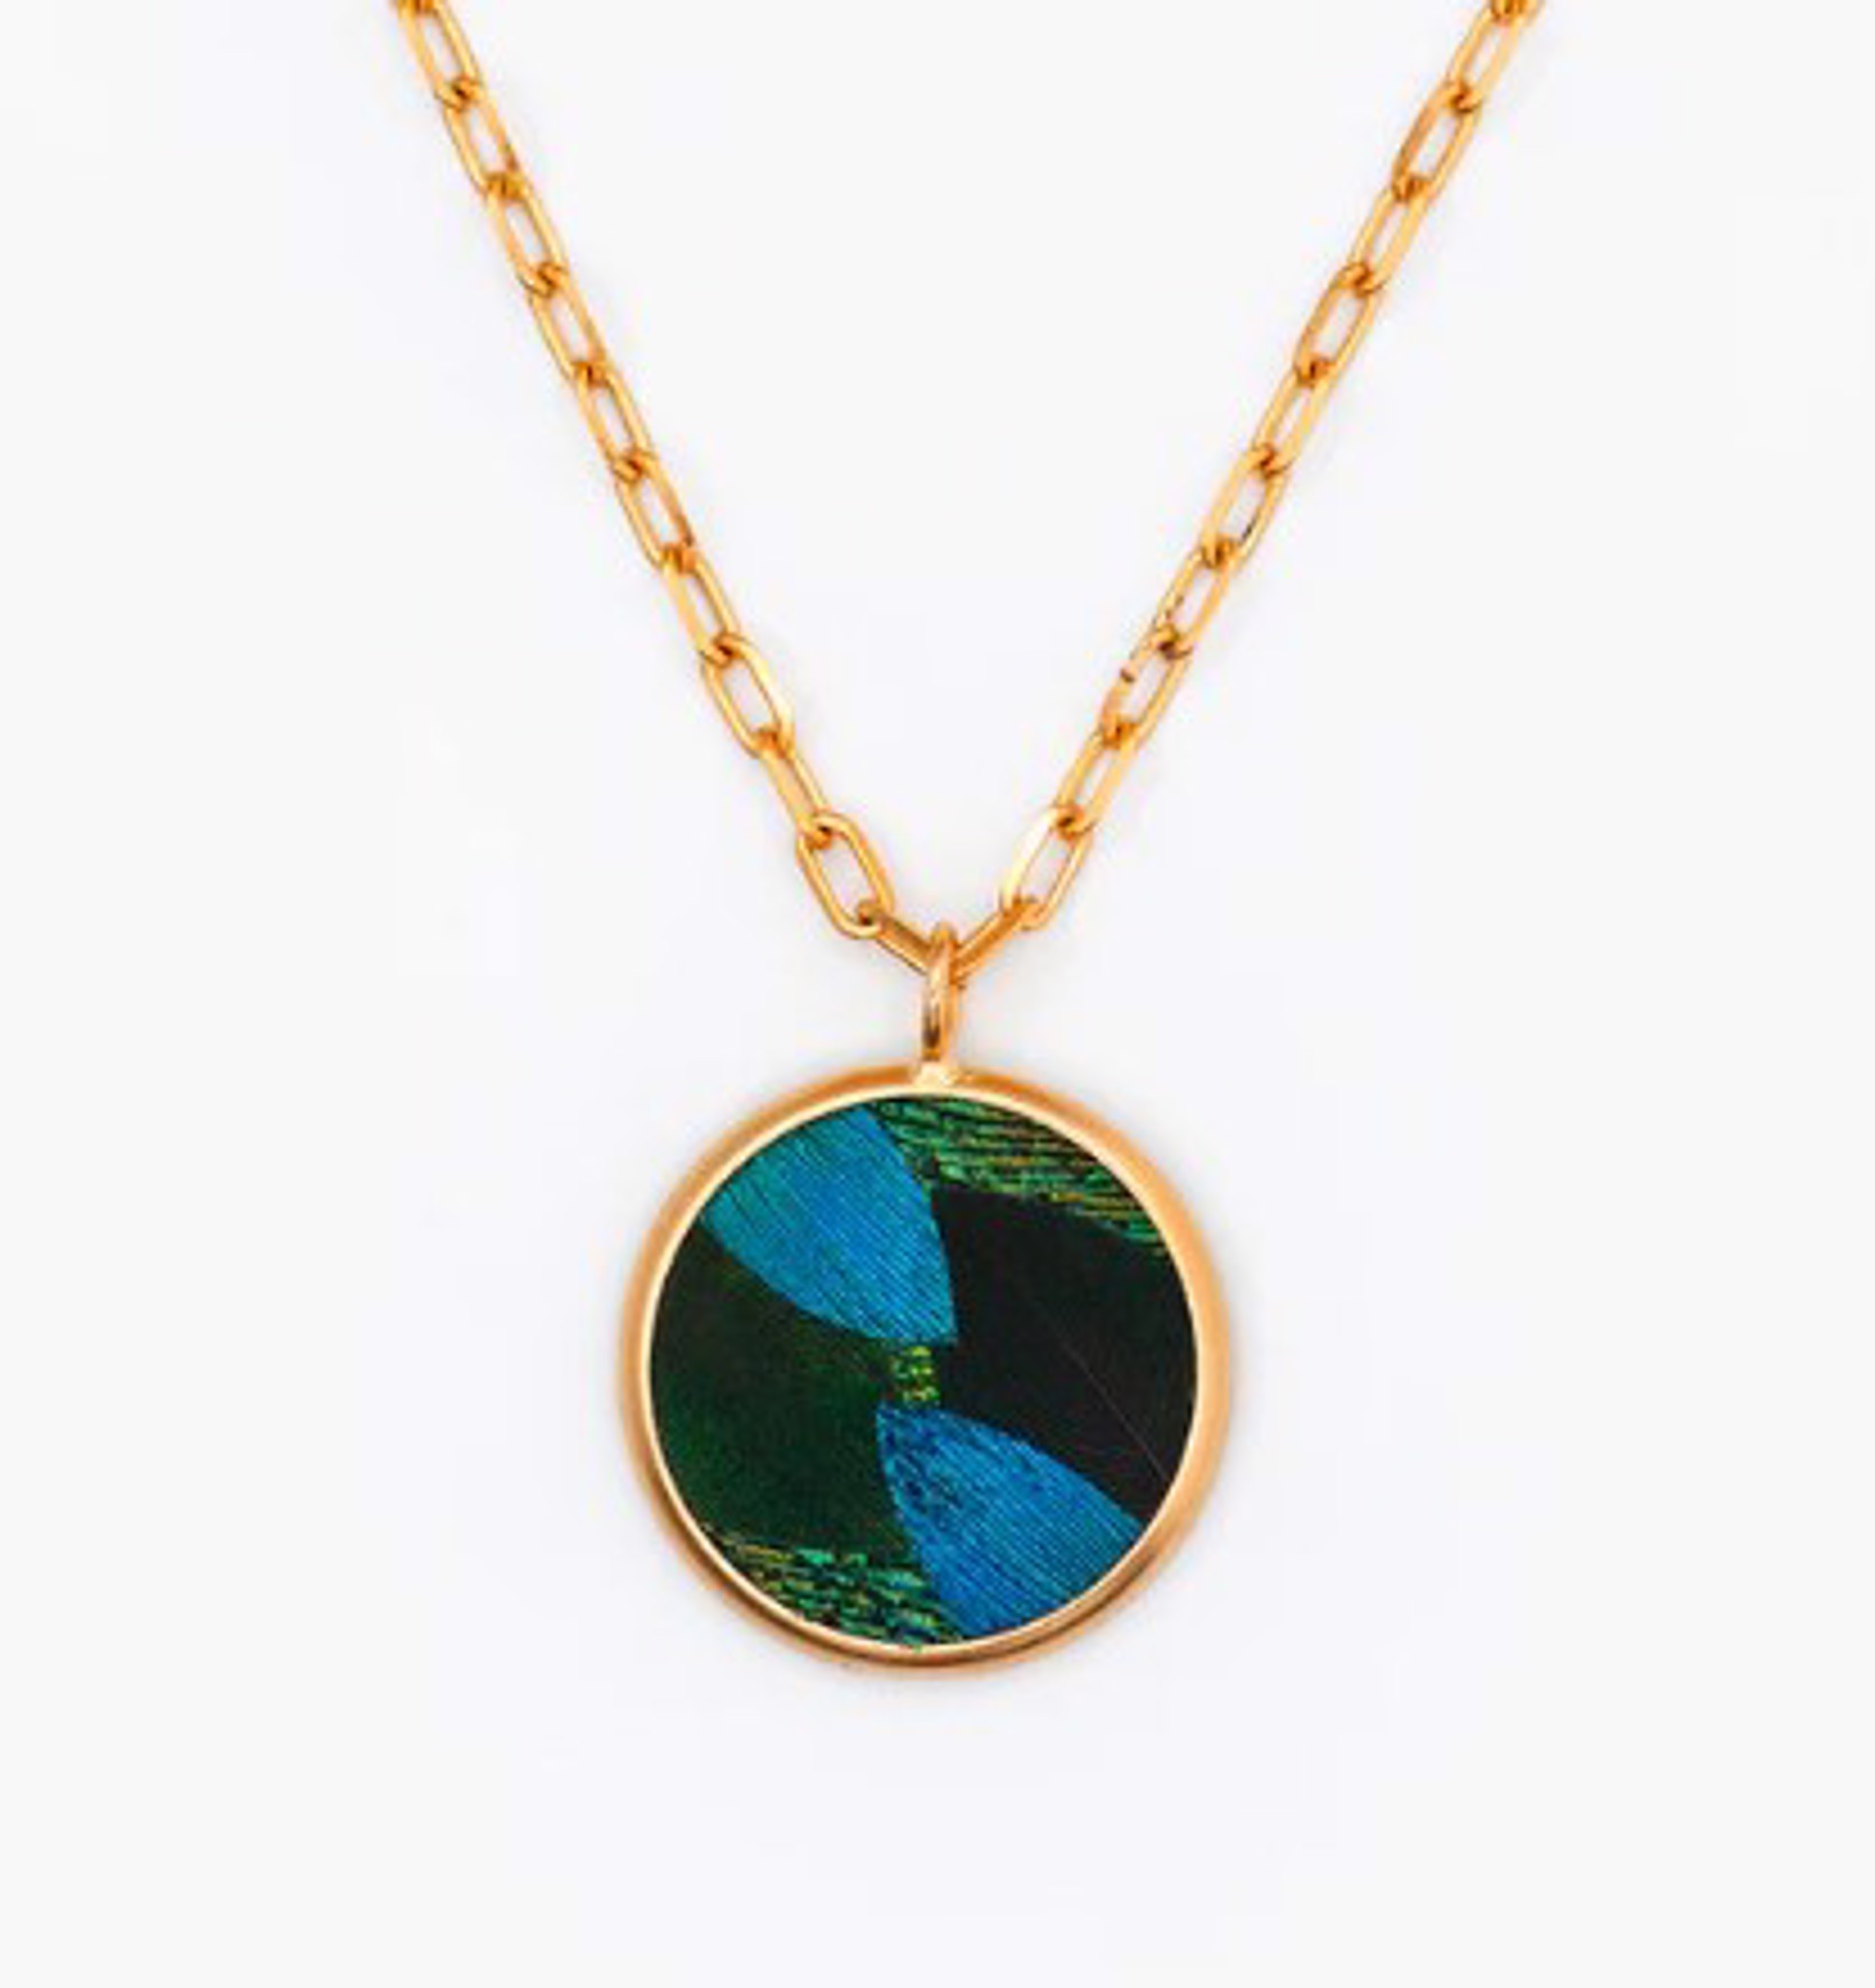 Carousel Round Necklace - Peacock by Brackish